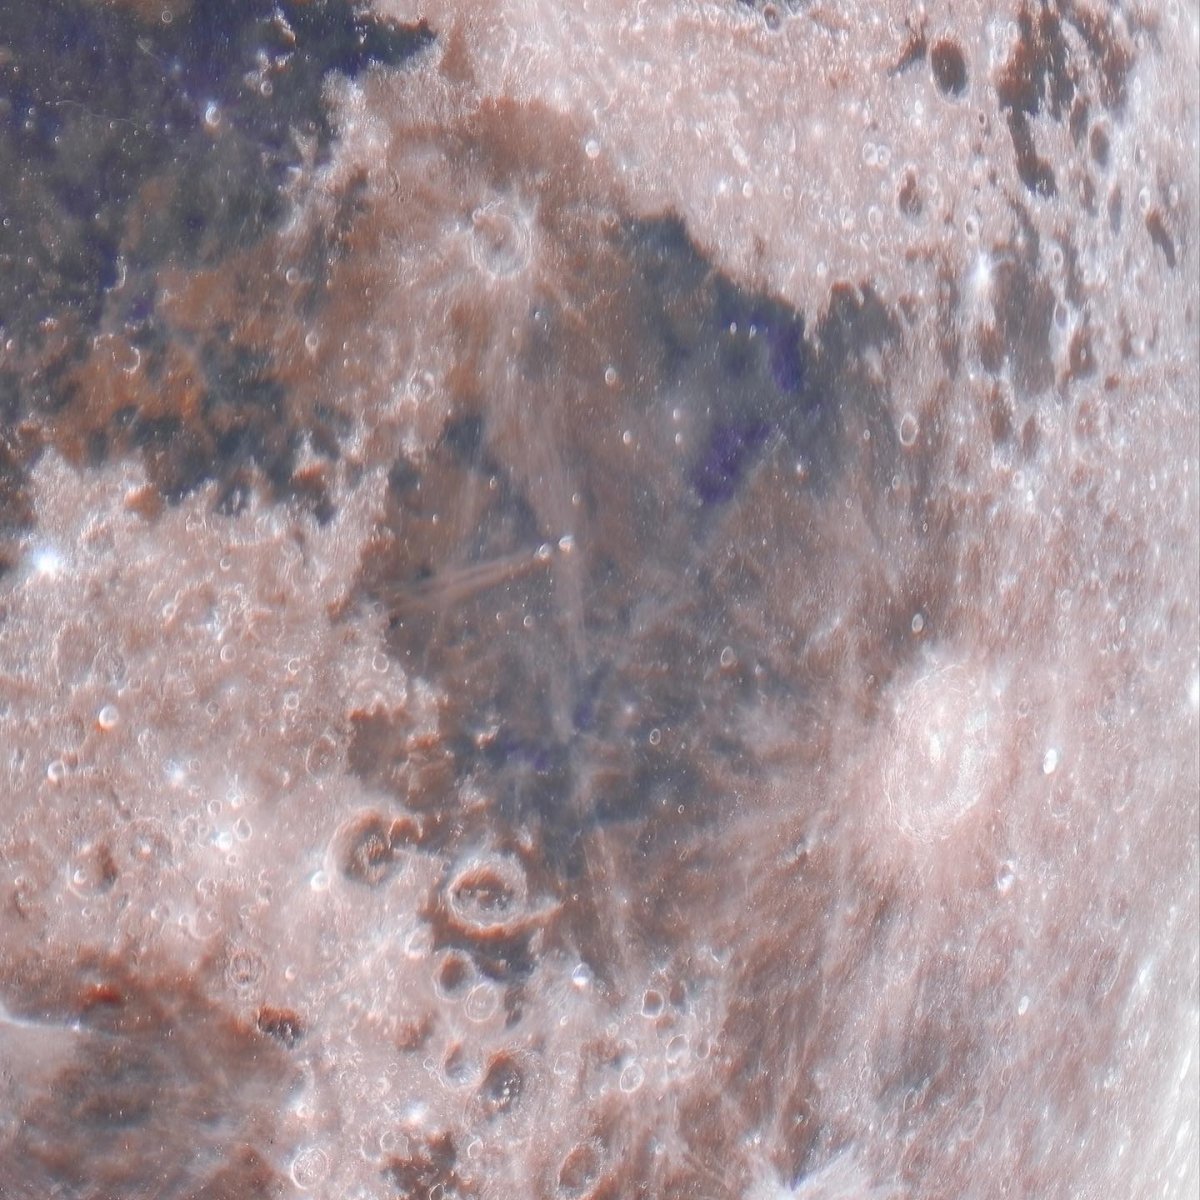 New highly detailed photos of the moon taken #2